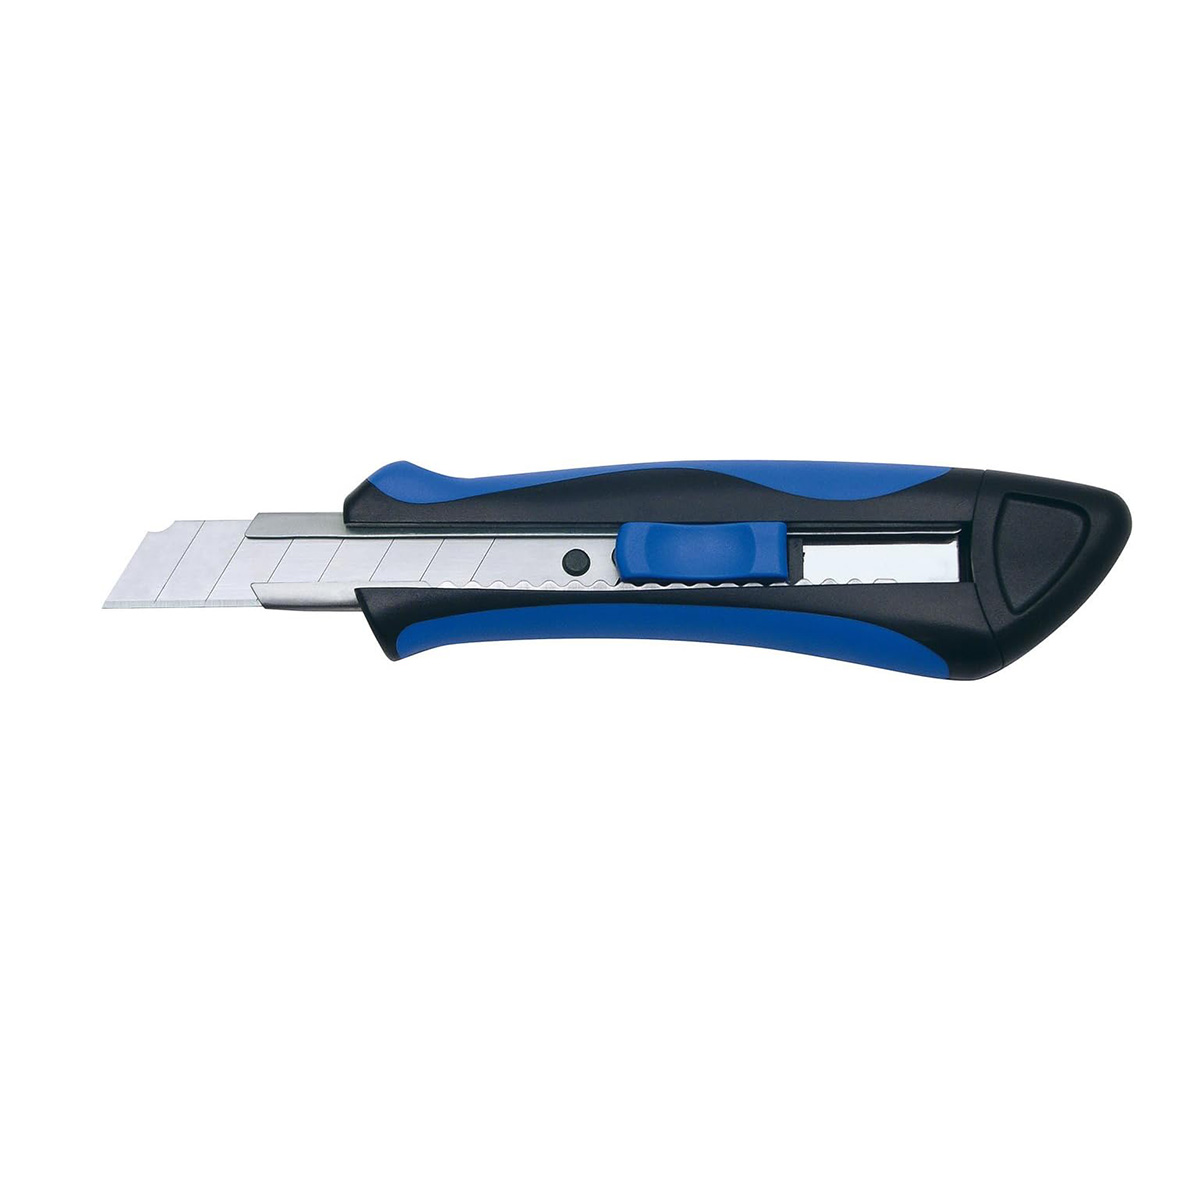 WEDO Cutter knife 18 mm with softgrip - blue/black